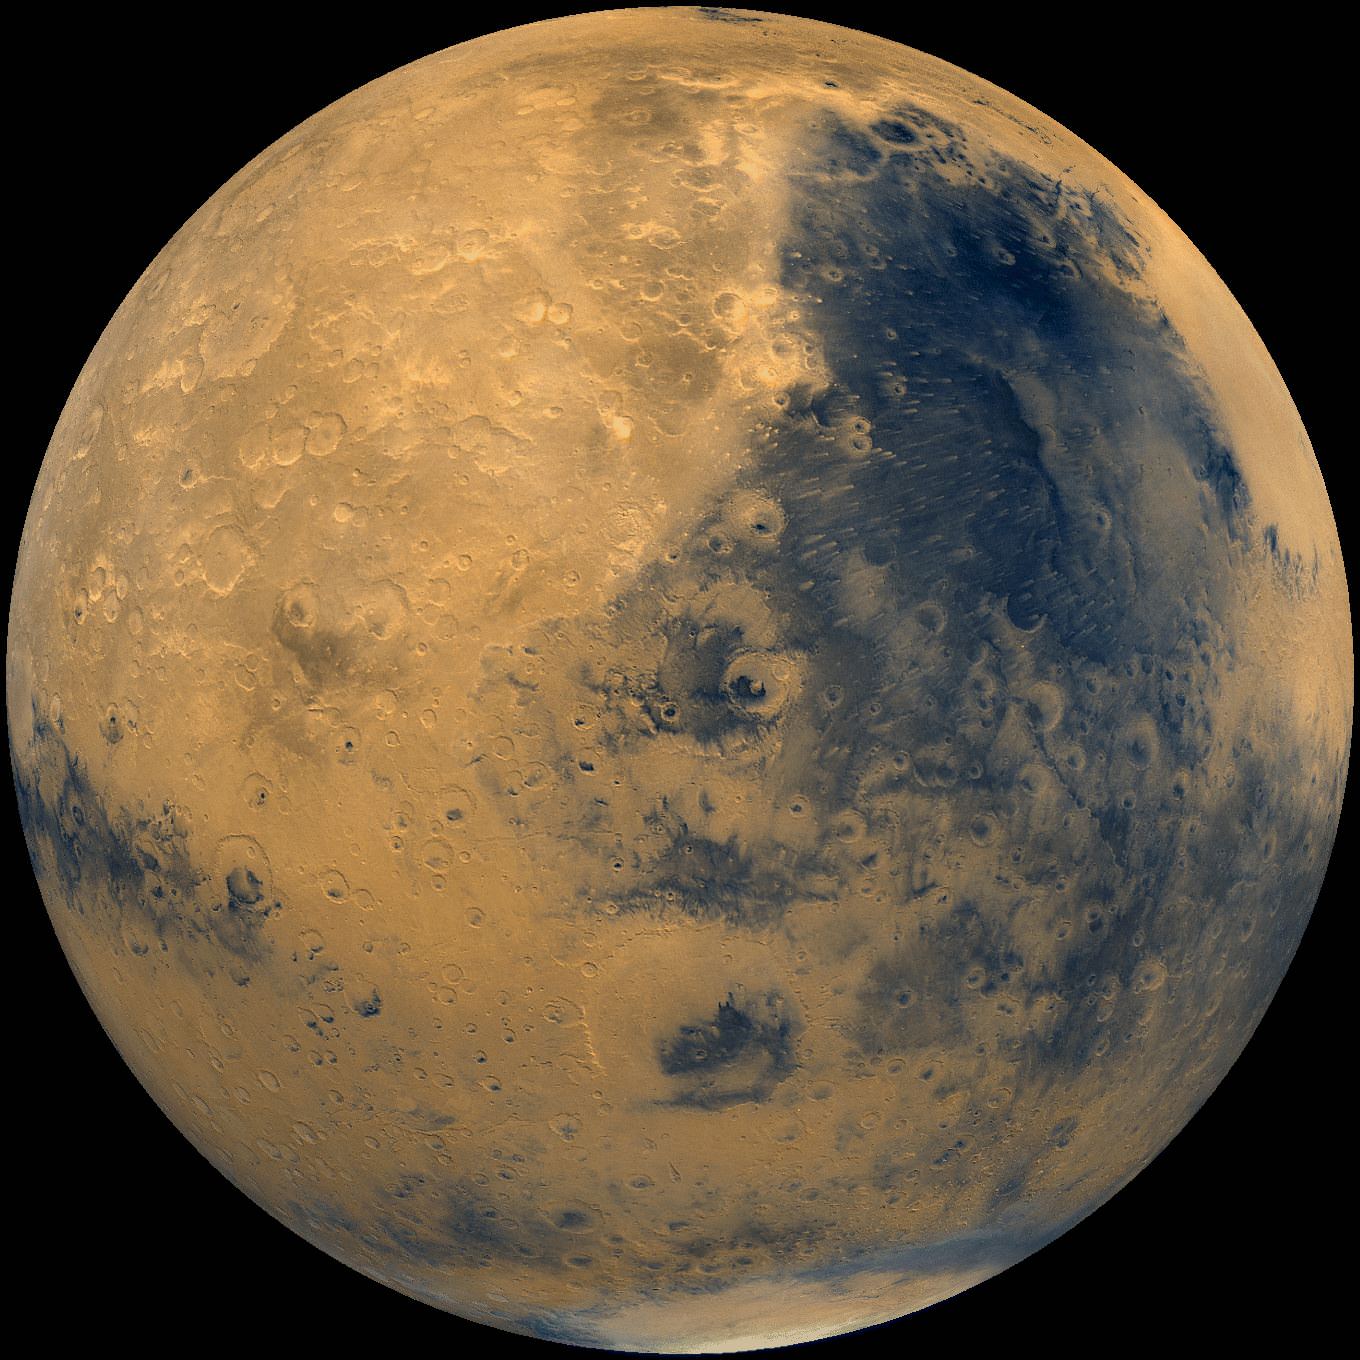 Mars! Martian meteorites make their way to Earth after being ejected from Mars by a meteor impact on the Red Planet. Image: NASA/National Space Science Data Center.